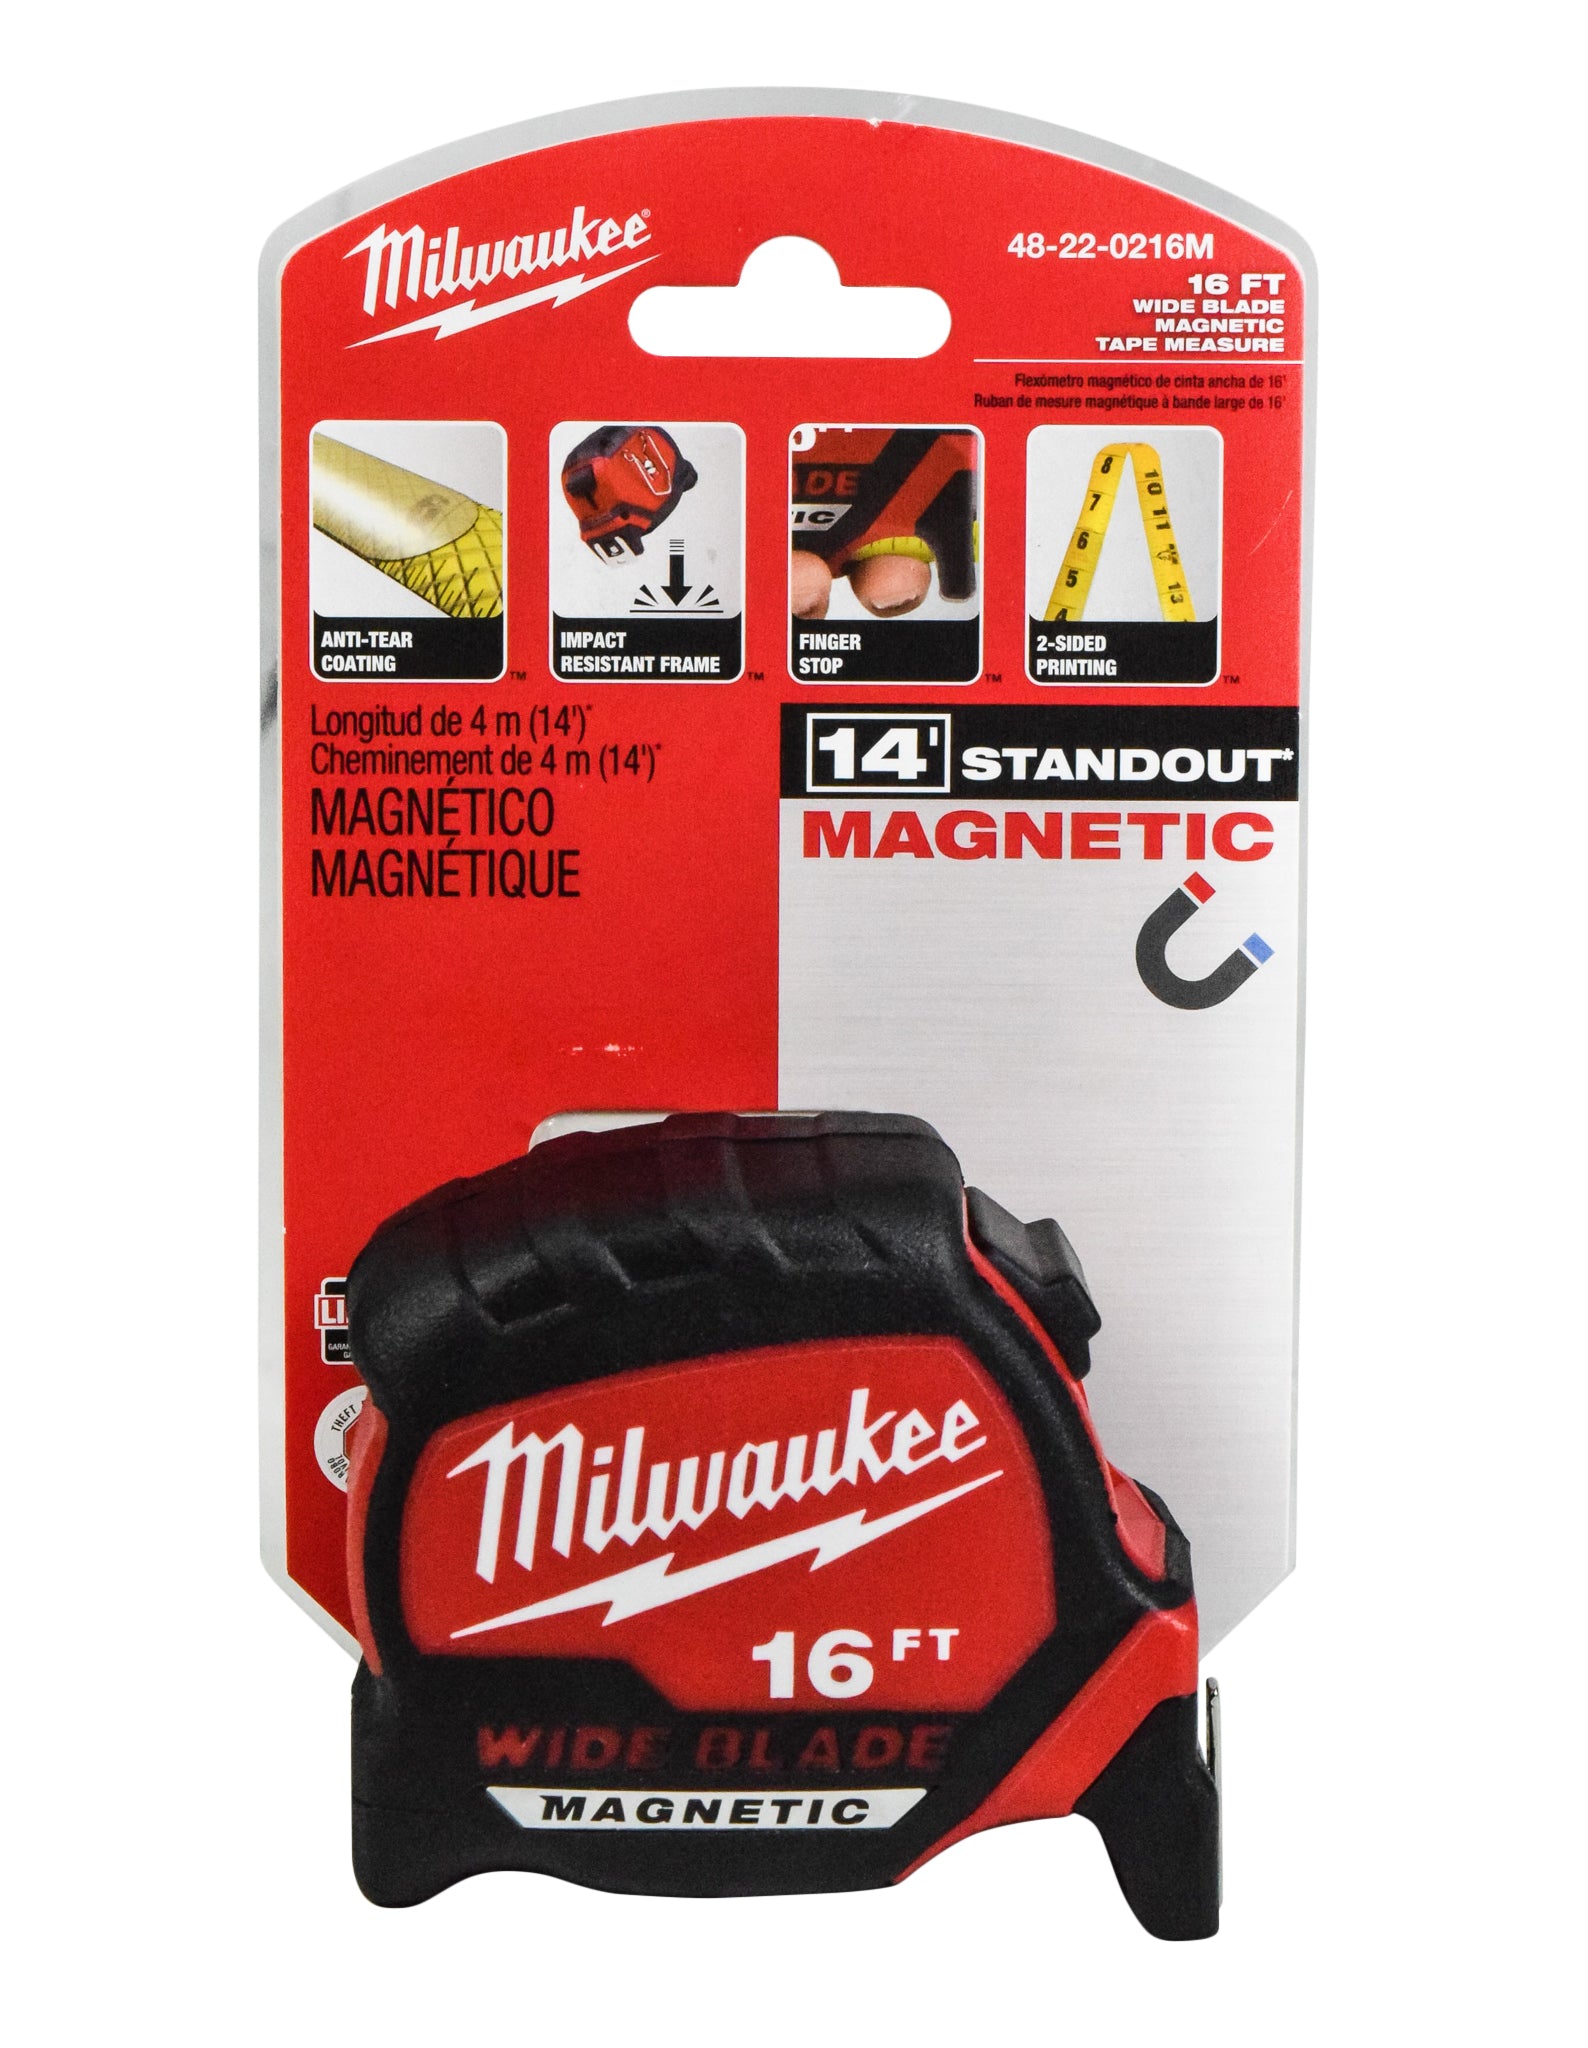 Milwaukee 48-22-0216M 16 ft. x 1.3 in. Wide Blade Magnetic Tape Measure